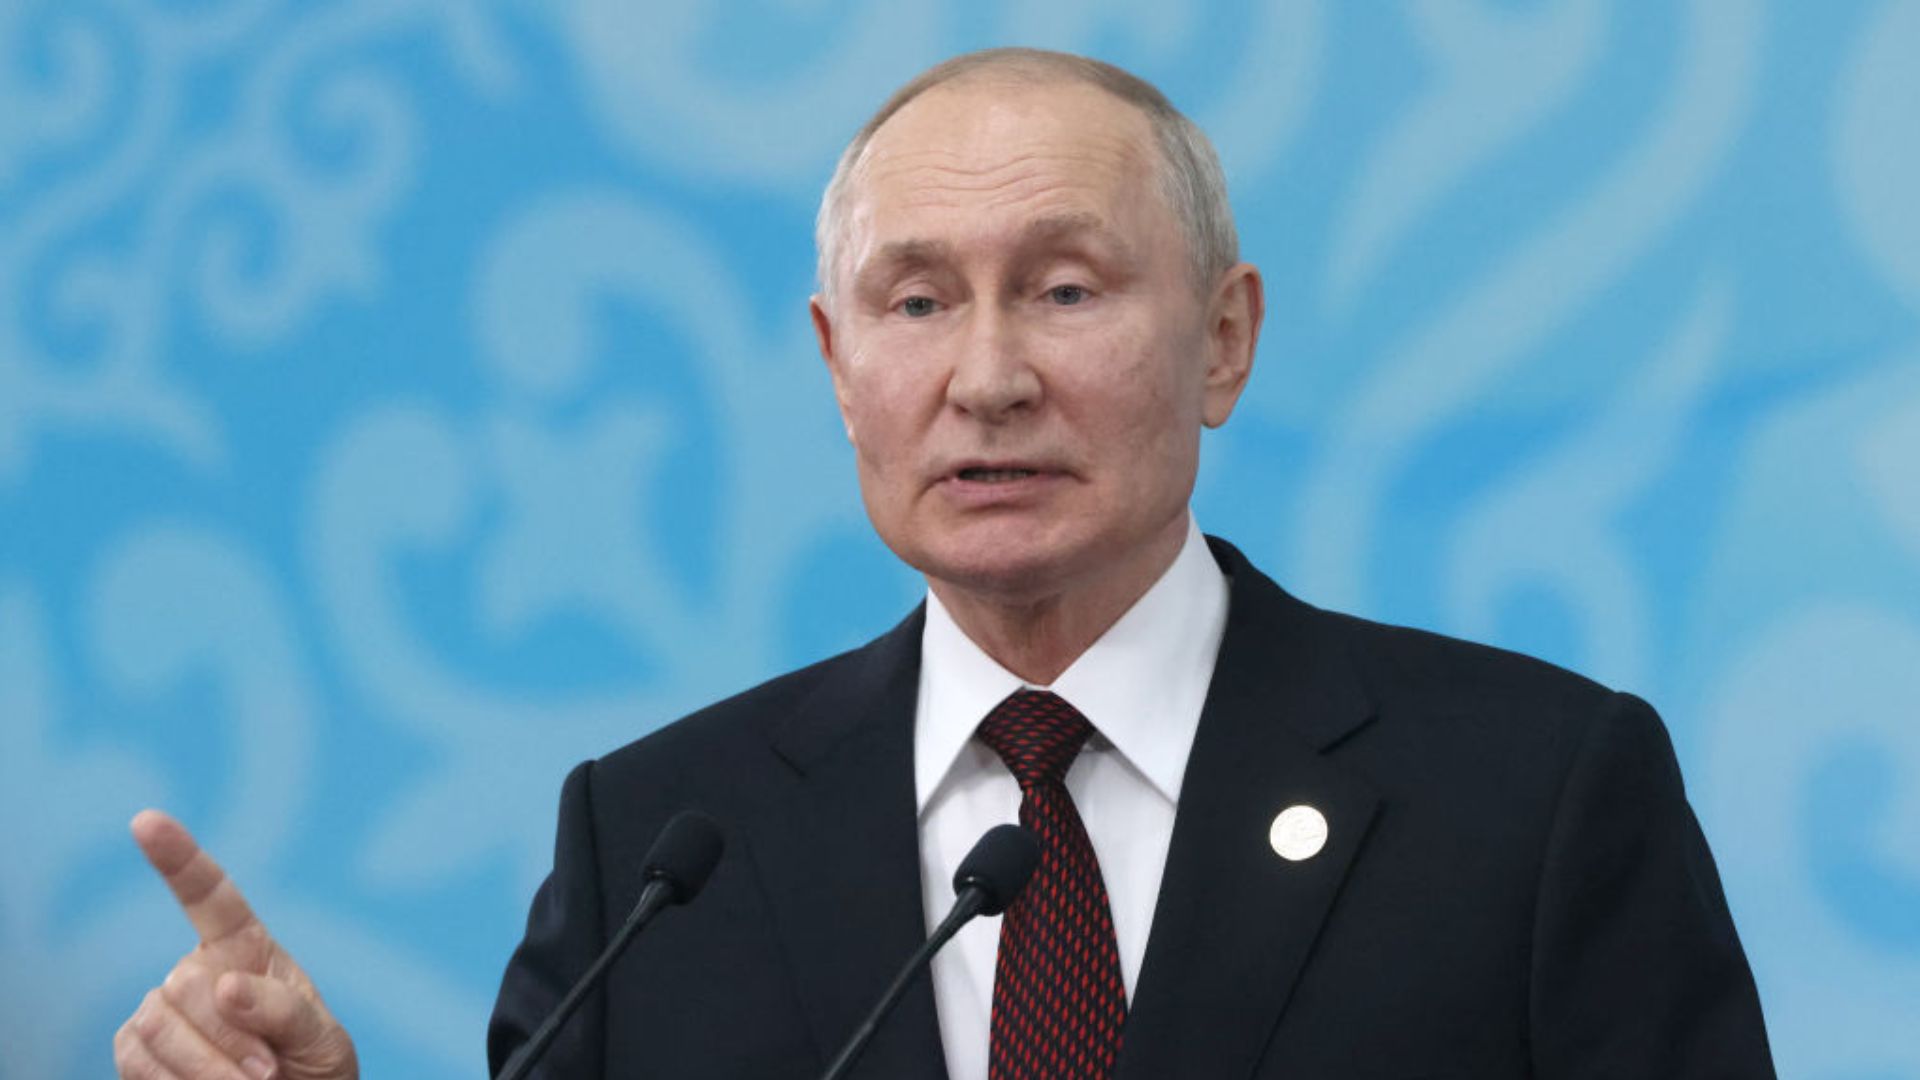 Vladimir Putin, the President of Russia, dressed in a suit and tie, speaking and gesturing with his right hand.